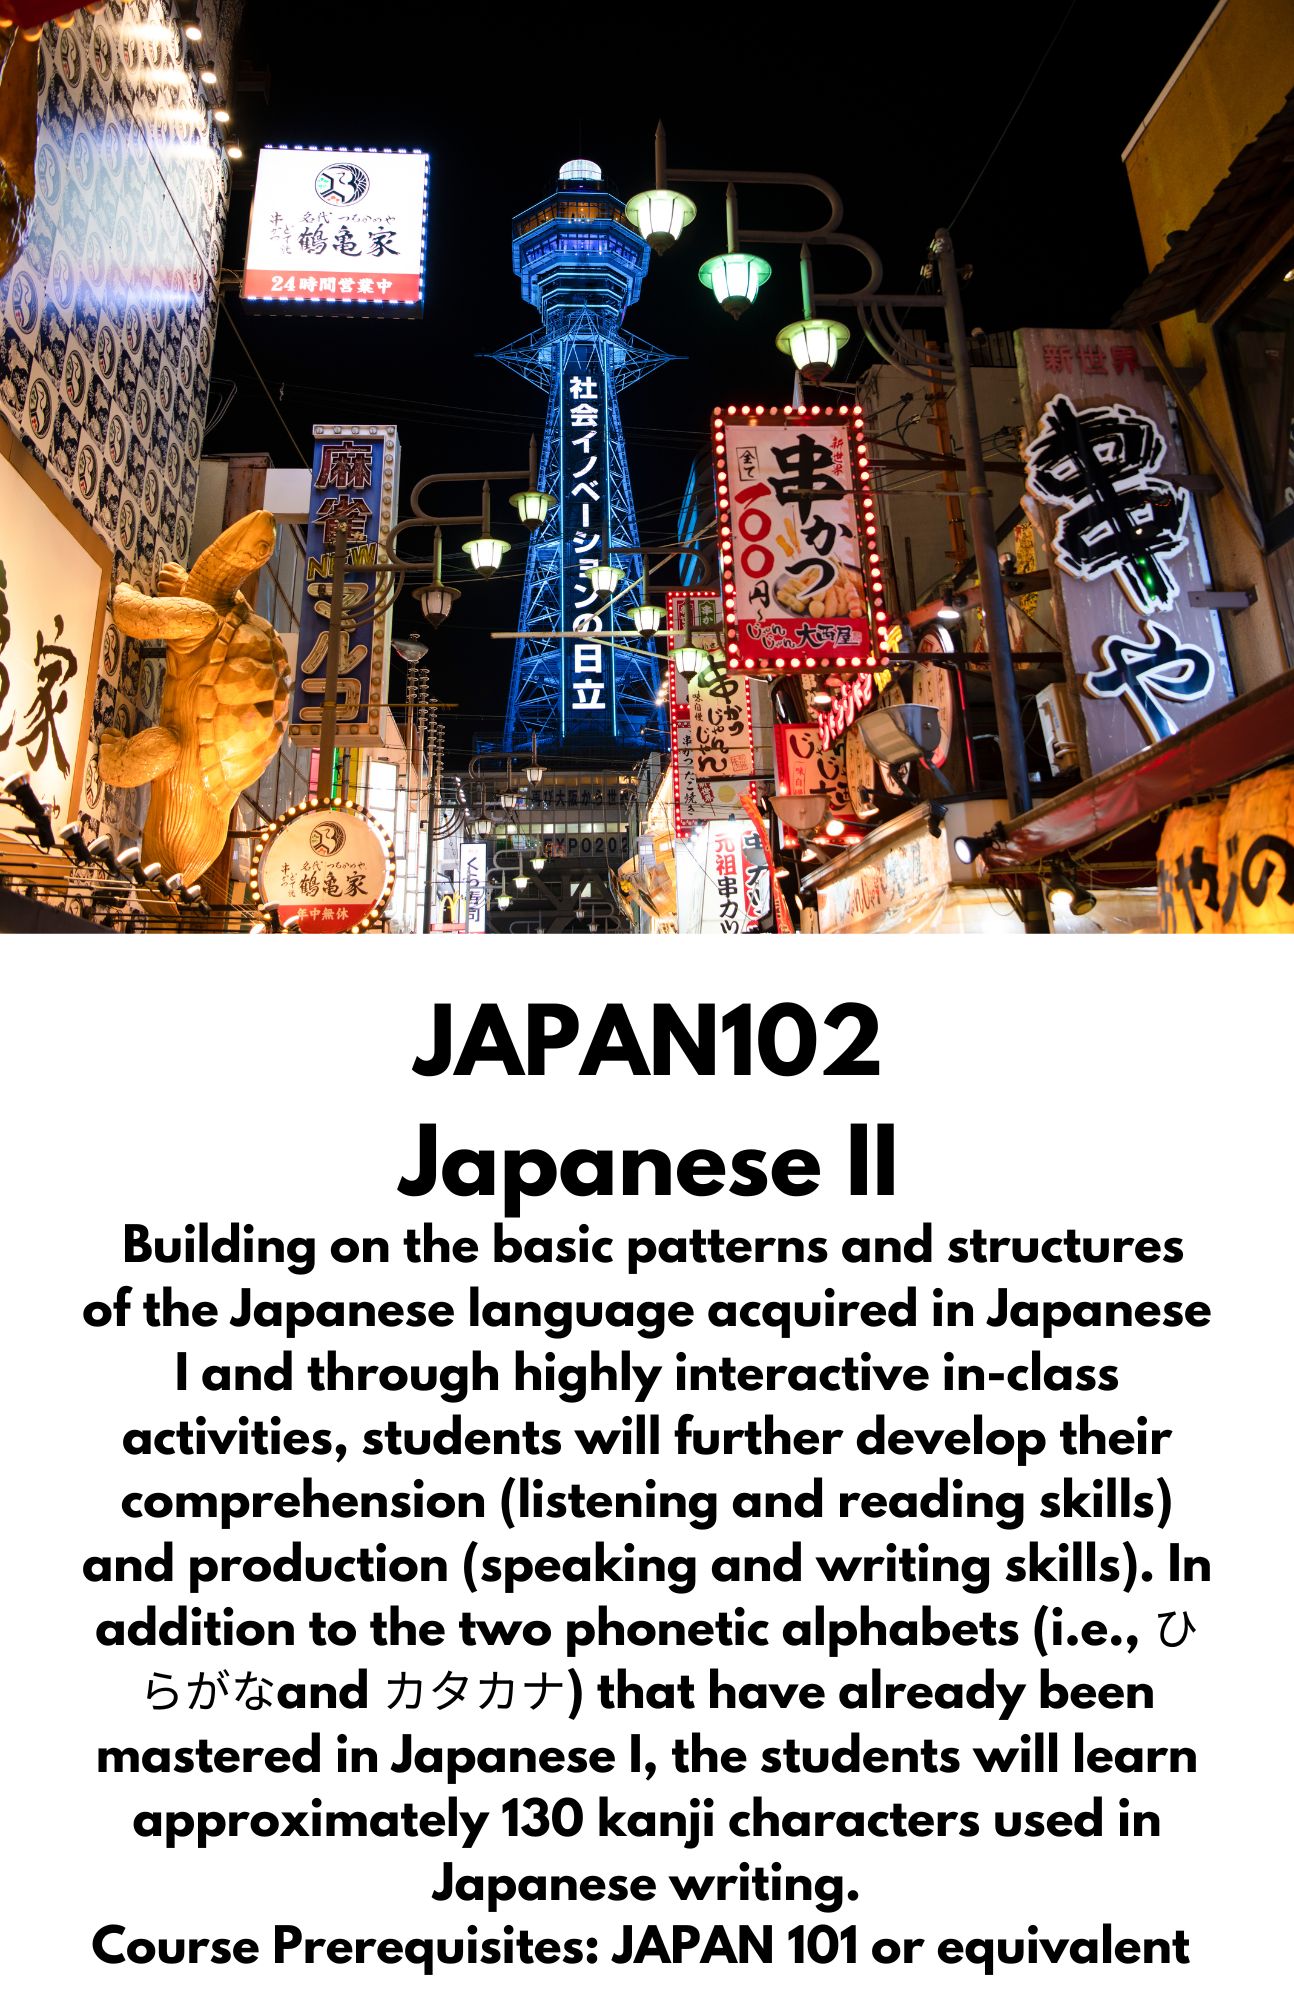 JAPAN102 Japanese II. Building on the basic patterns and structures of the Japanese language acquired in Japanese I and through highly interactive in-class activities, students will further develop their comprehension (listening and reading skills) and production (speaking and writing skills). In addition to the two phonetic alphabets (i.e., ひらがなand カタカナ) that have already been mastered in Japanese I, the students will learn approximately 130 kanji characters used in Japanese writing. Course Prerequisites: JAPAN 101 or equivalent